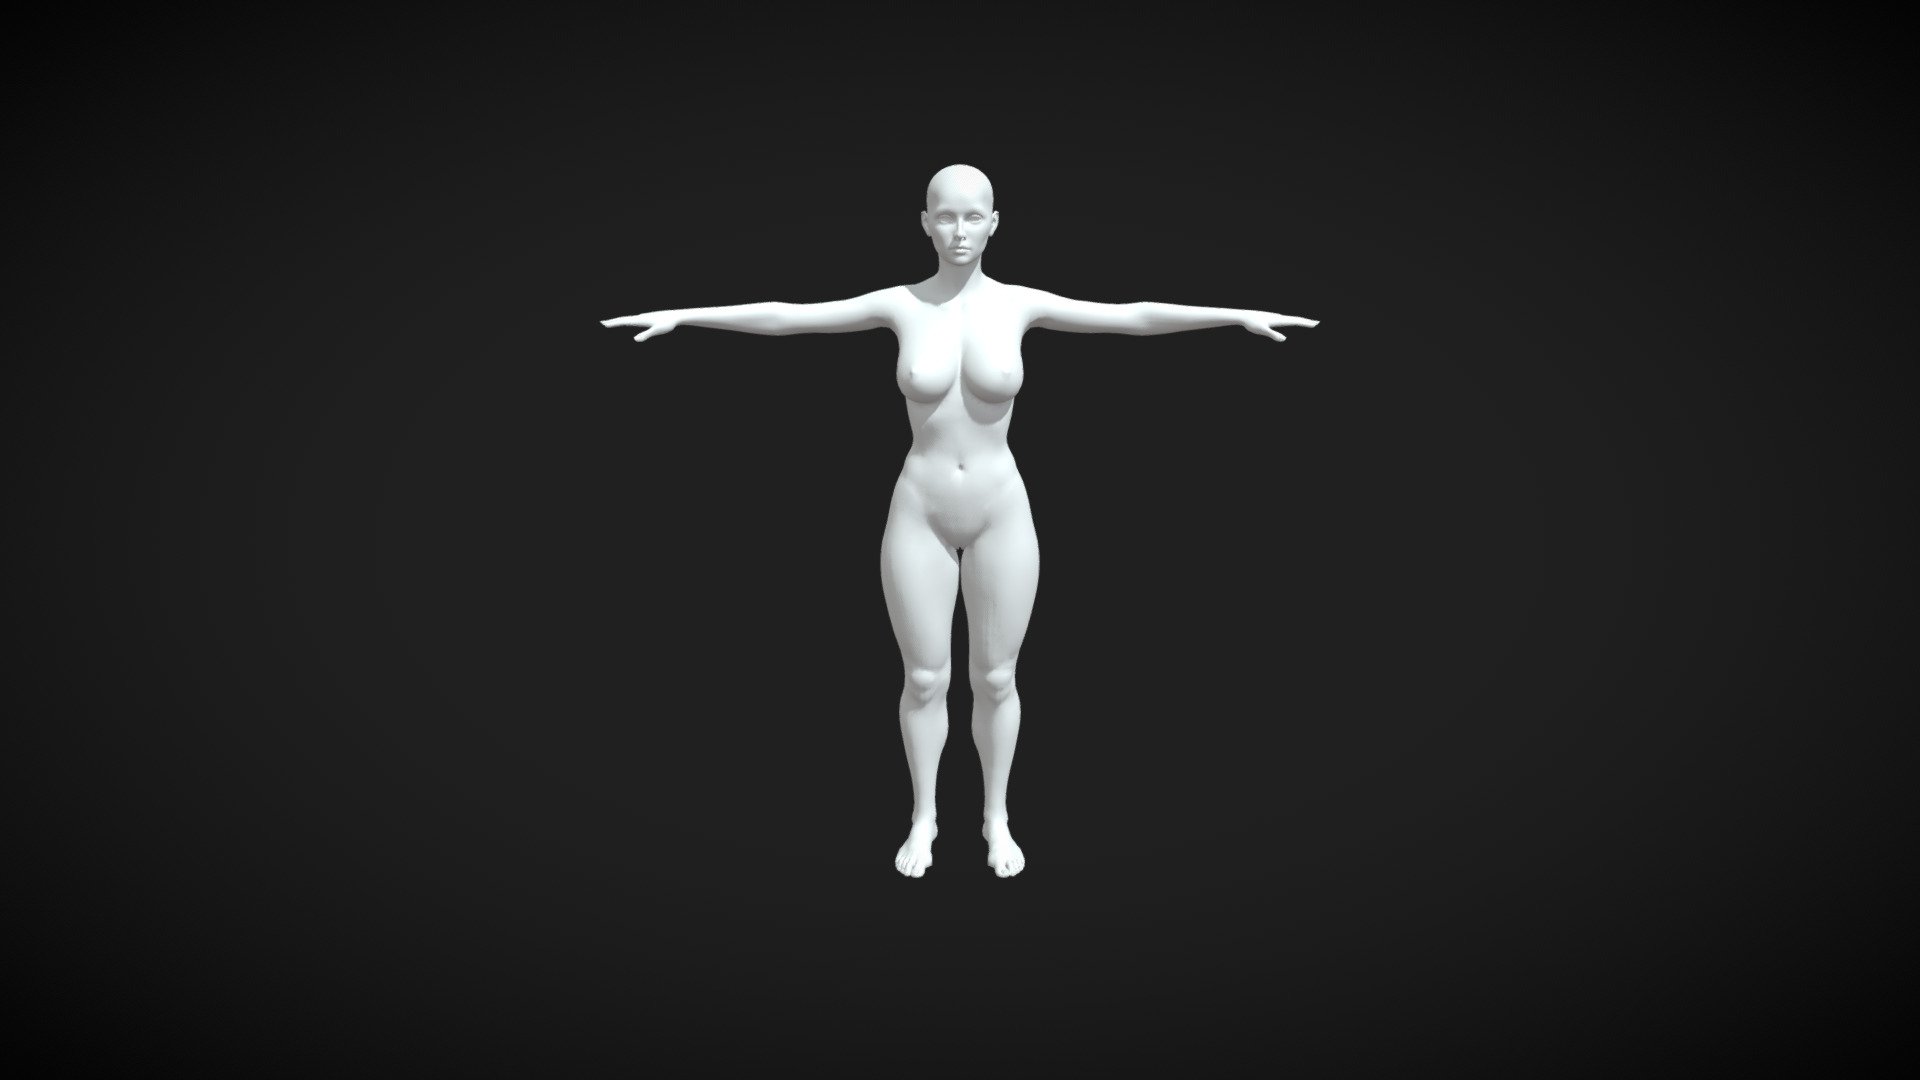 Introducing our High Detailed Women Fit Body Base Mesh in T-Pose 3D model – the ultimate foundation for your character design endeavors! 👩💻 Crafted with meticulous attention to detail and anatomical accuracy, this versatile mesh provides a robust starting point for character modeling, animation, and sculpting projects. Whether you're a professional 3D artist, an aspiring animator, or a game developer, our High Detailed Women Fit Body Base Mesh offers the level of detail and flexibility needed to create stunningly realistic characters. Download now and elevate your character designs to new heights of quality and realism! #WomenBody #HighDetail #FitMesh #Tpose #3DModeling #CharacterDesign #DigitalArt - High Detailed Women Fit Body Base Mesh T-Pose - Buy Royalty Free 3D model by Sujit Mishra (@sujitanshumishra) 3d model